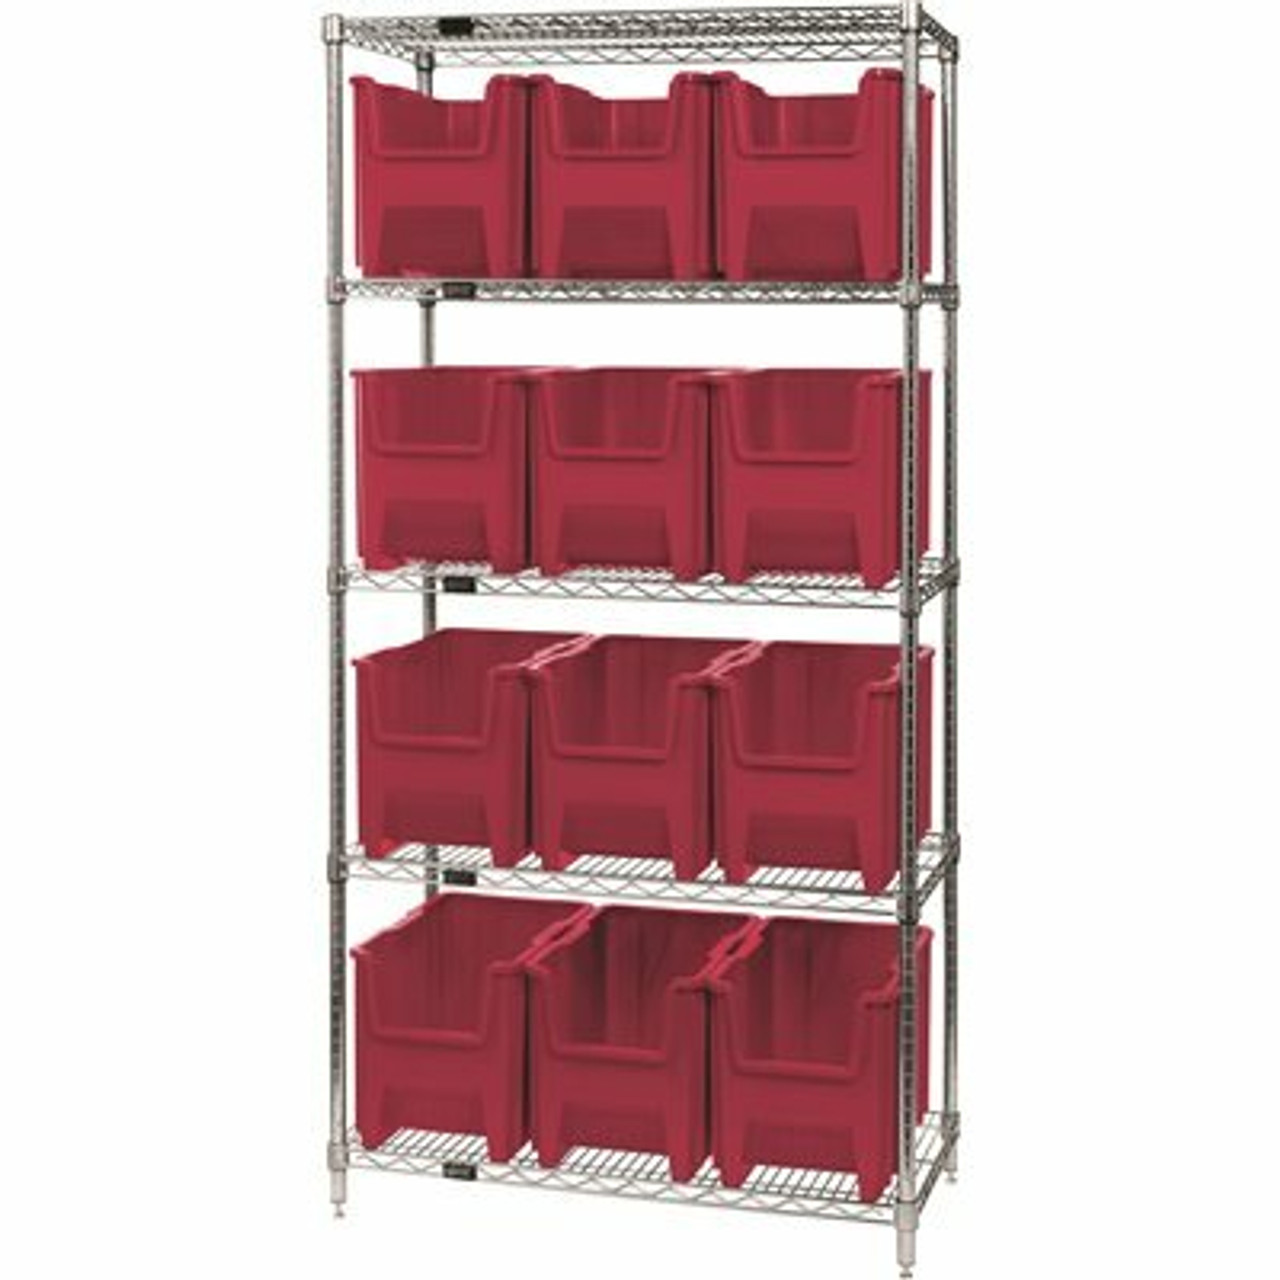 Quantum Storage Systems 18 In. X 36 In. X 74 In. Giant Stack Container Wire Shelving System 5-Tier In Red - 3571539